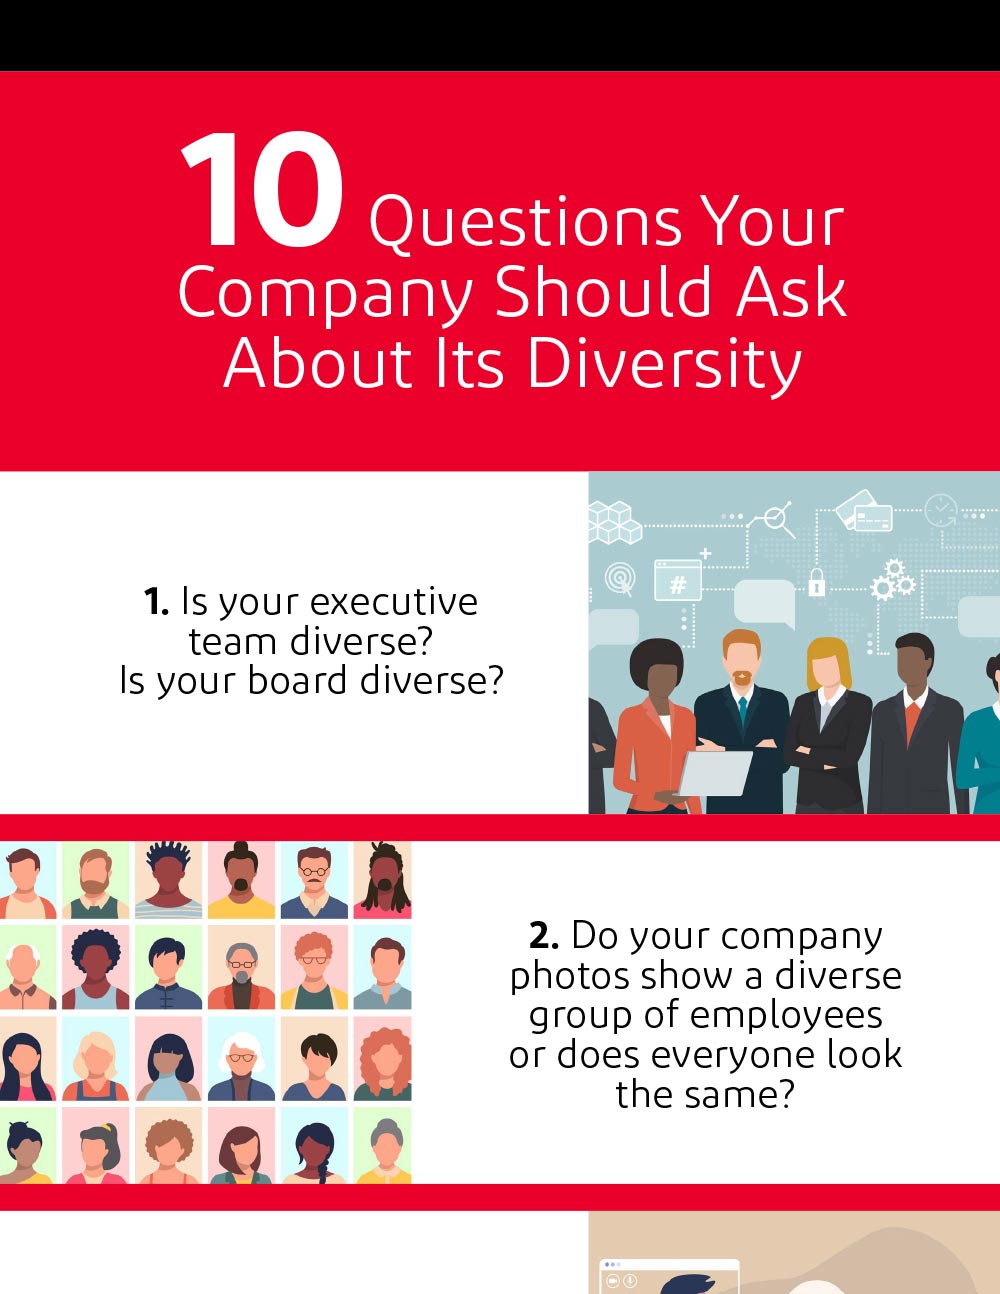 10 Questions Your Company Should Ask About Its Diversity